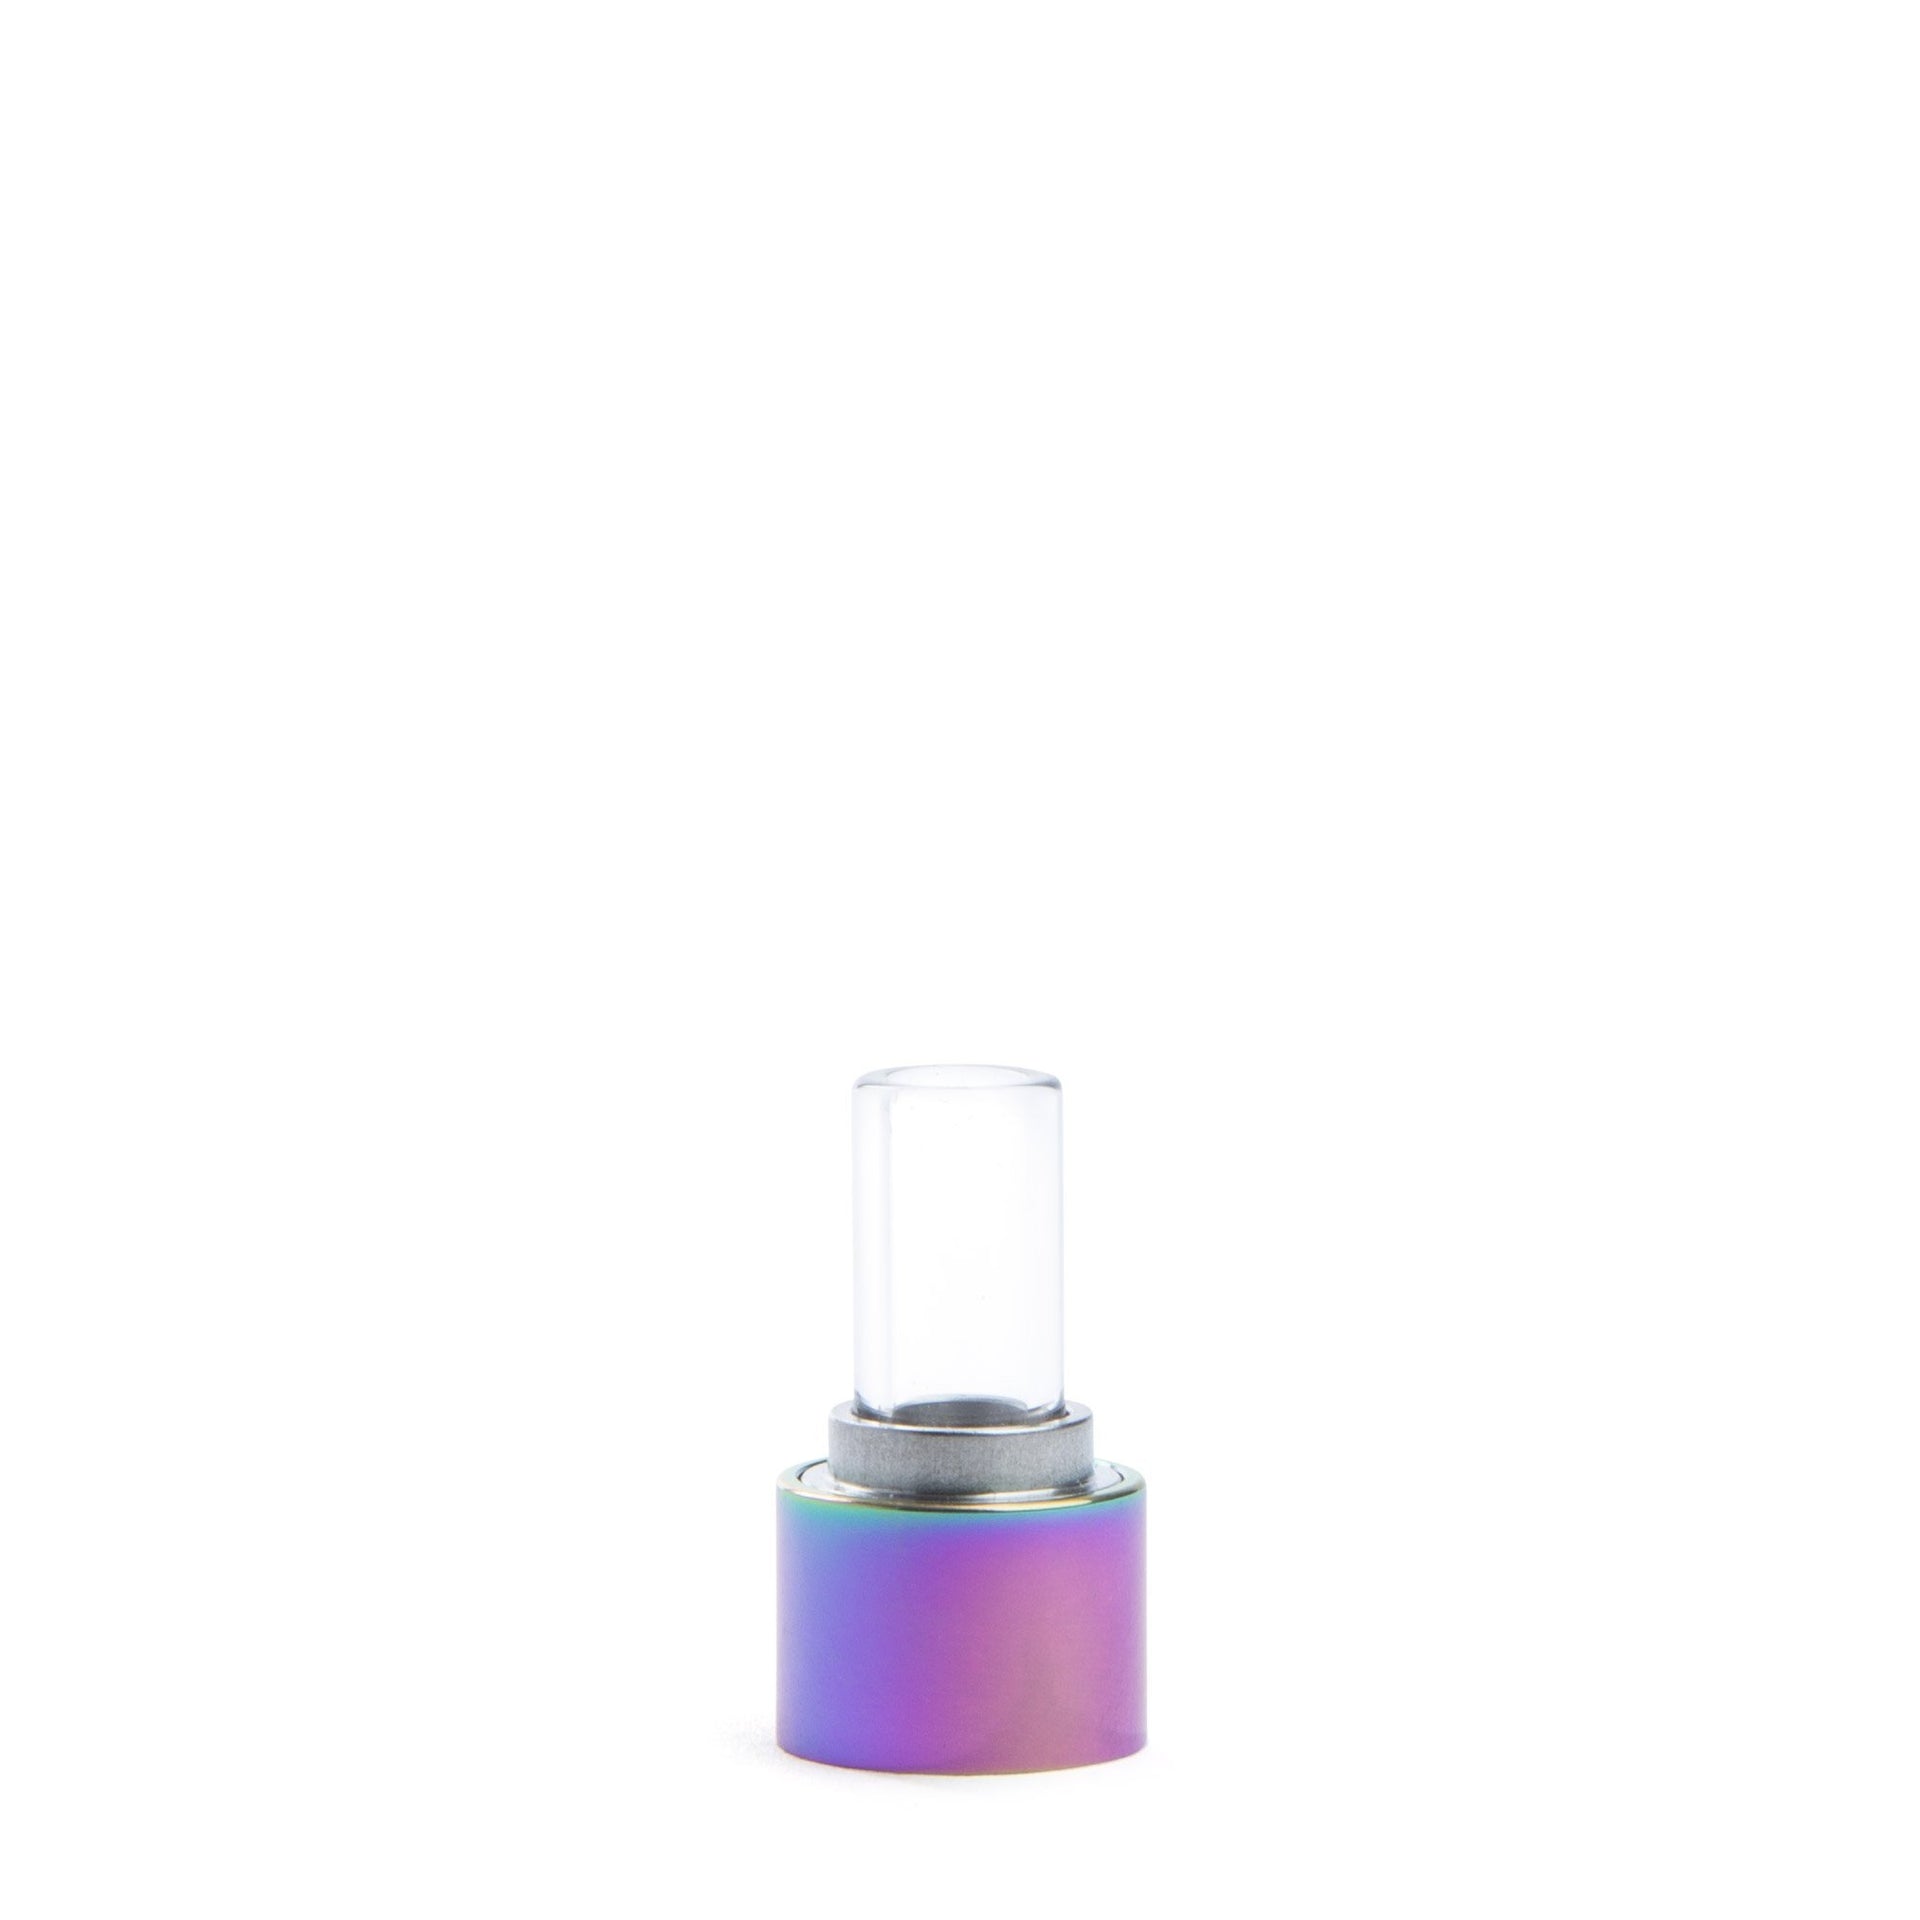 LINX Hypnos Zero Iridescent Replacement Mouthpiece - 420 Science - The most trusted online smoke shop.